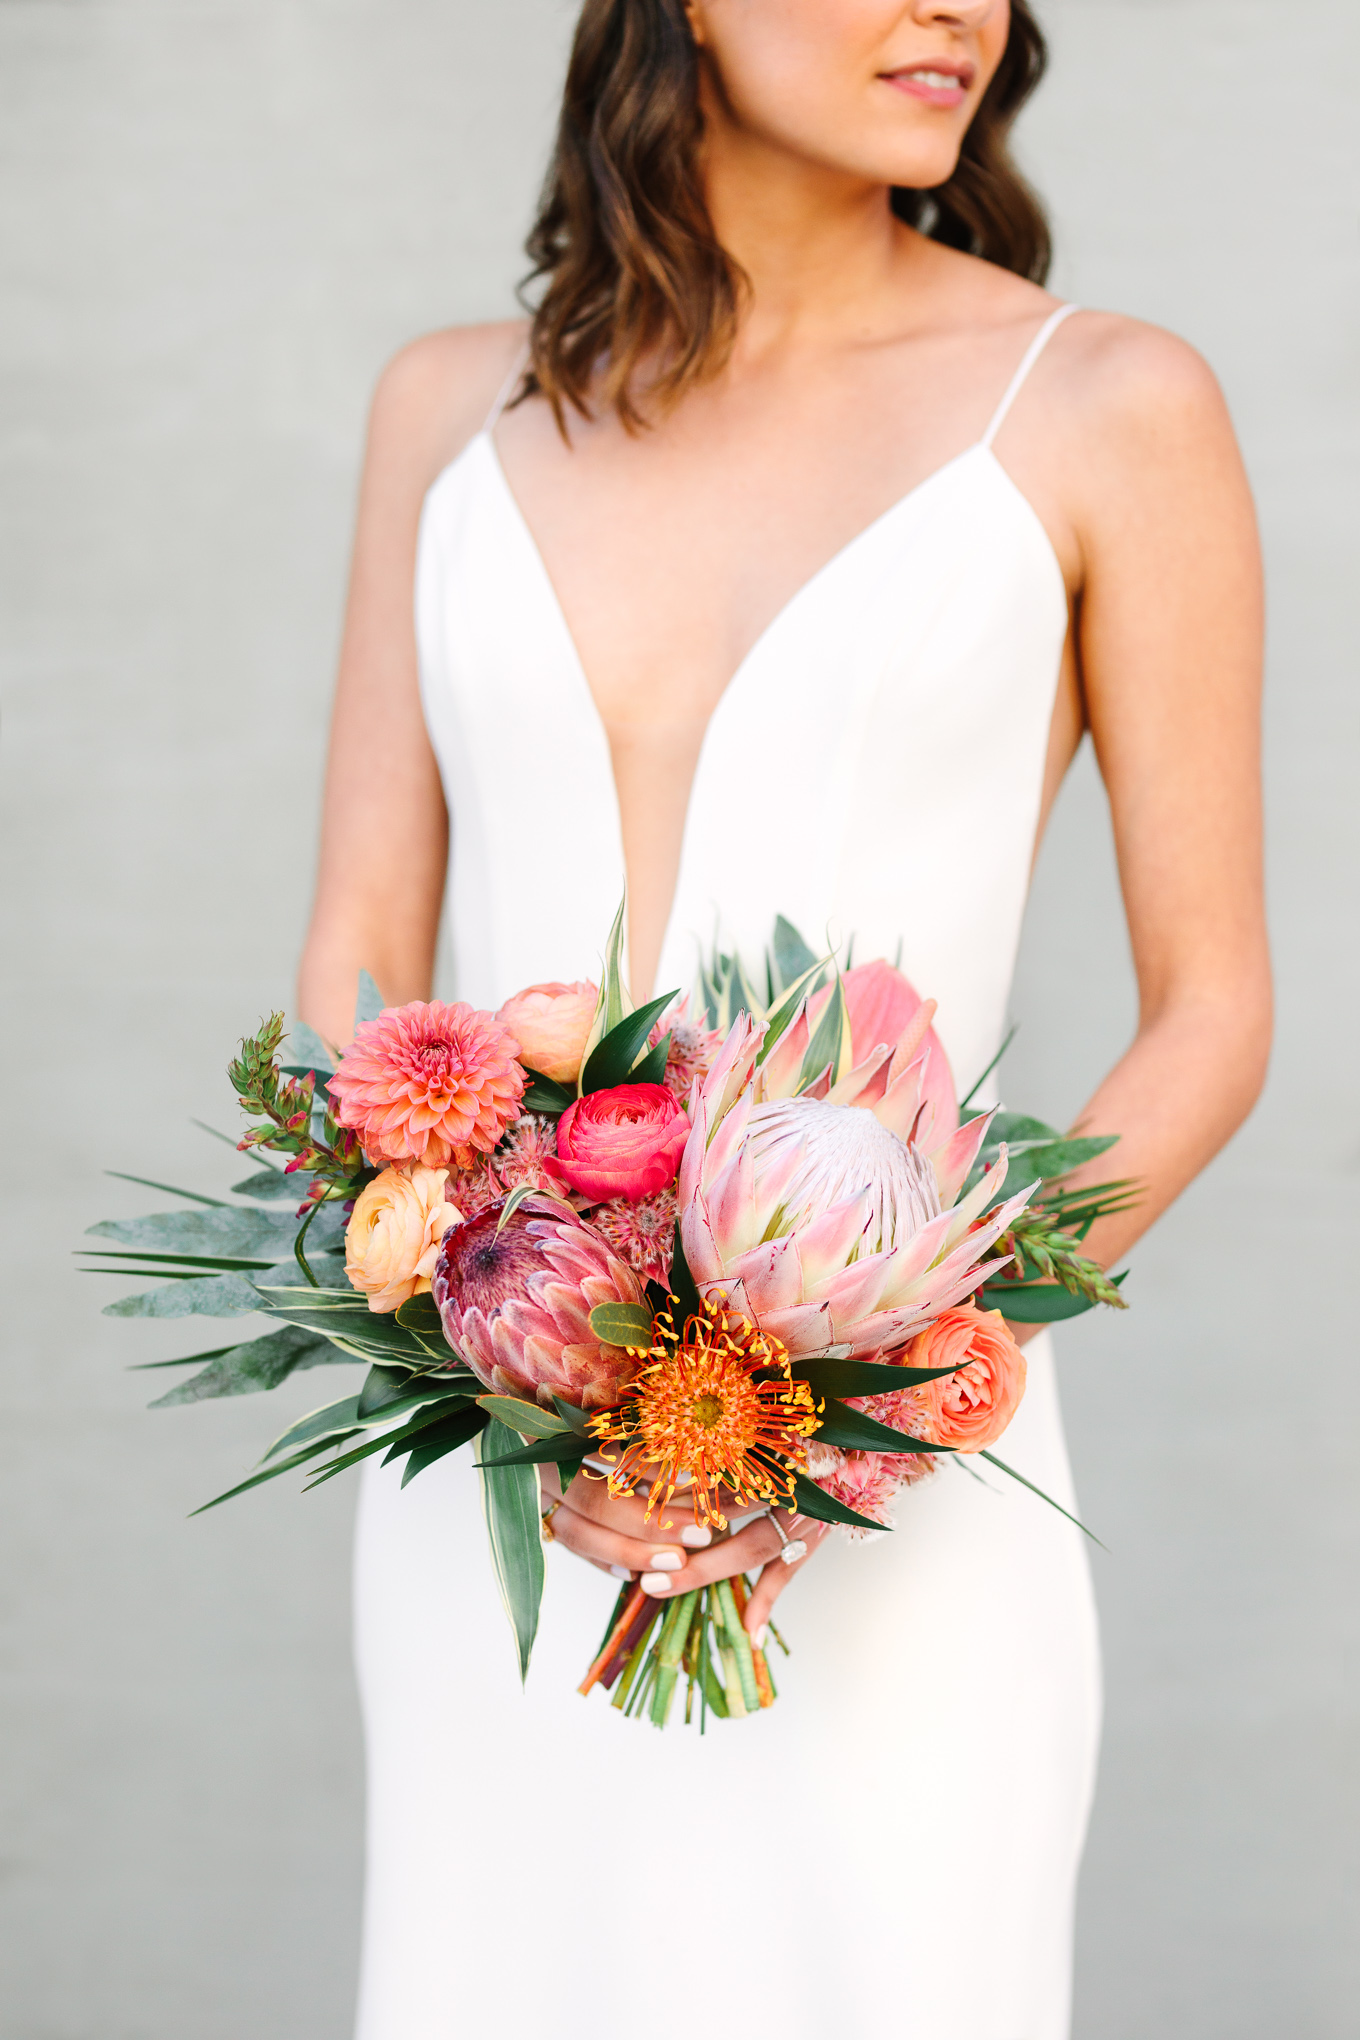 Tropical protea wedding flowers | Beautiful bridal bouquet inspiration and advice | Colorful and elevated wedding photography for fun-loving couples in Southern California | #weddingflowers #weddingbouquet #bridebouquet #bouquetideas #uniquebouquet   Source: Mary Costa Photography | Los Angeles